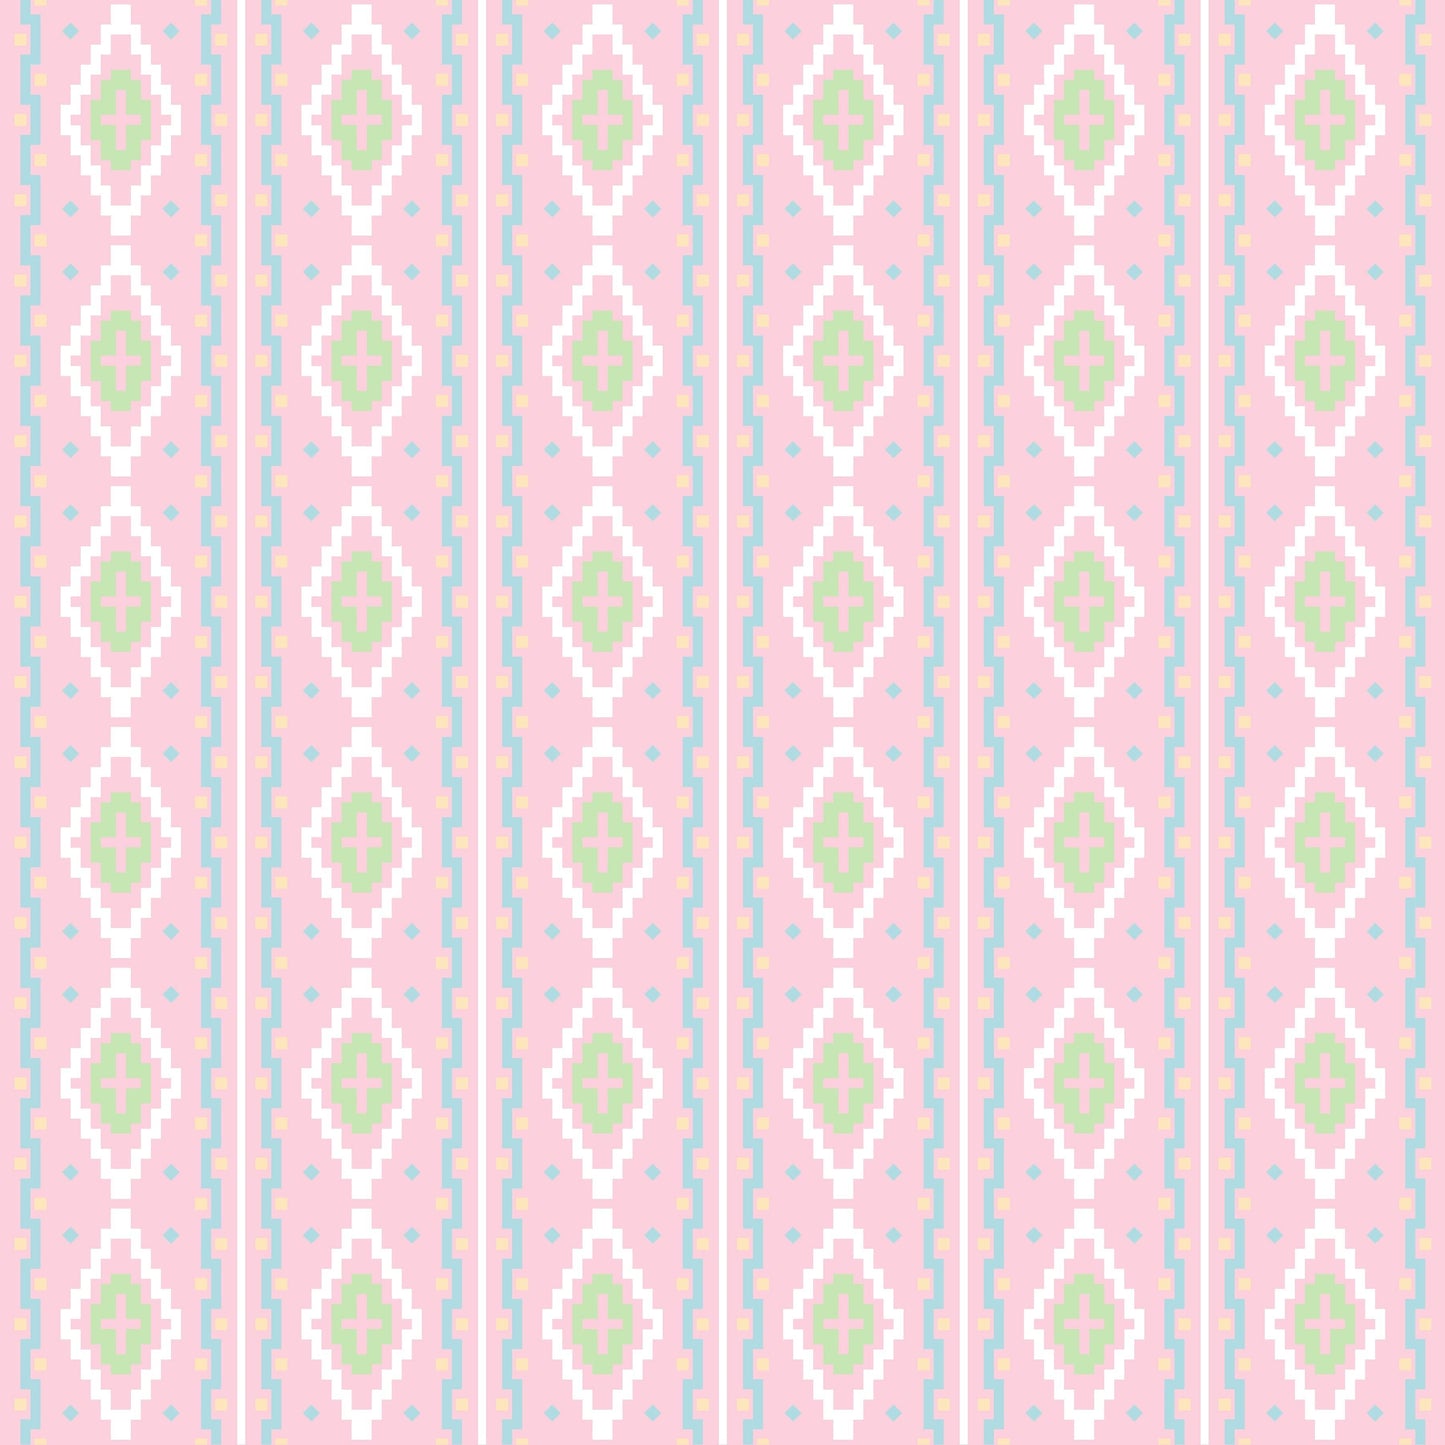 Detailed view of the Rose Quetzal fabric from HowdyHo, displaying a charming vertical striped pattern with delicate diamond and floral motifs in soft pink, green, and white hues, set against a pale pink background. This textile pattern exudes a vintage-inspired charm, ideal for a unique and fashionable clothing piece.